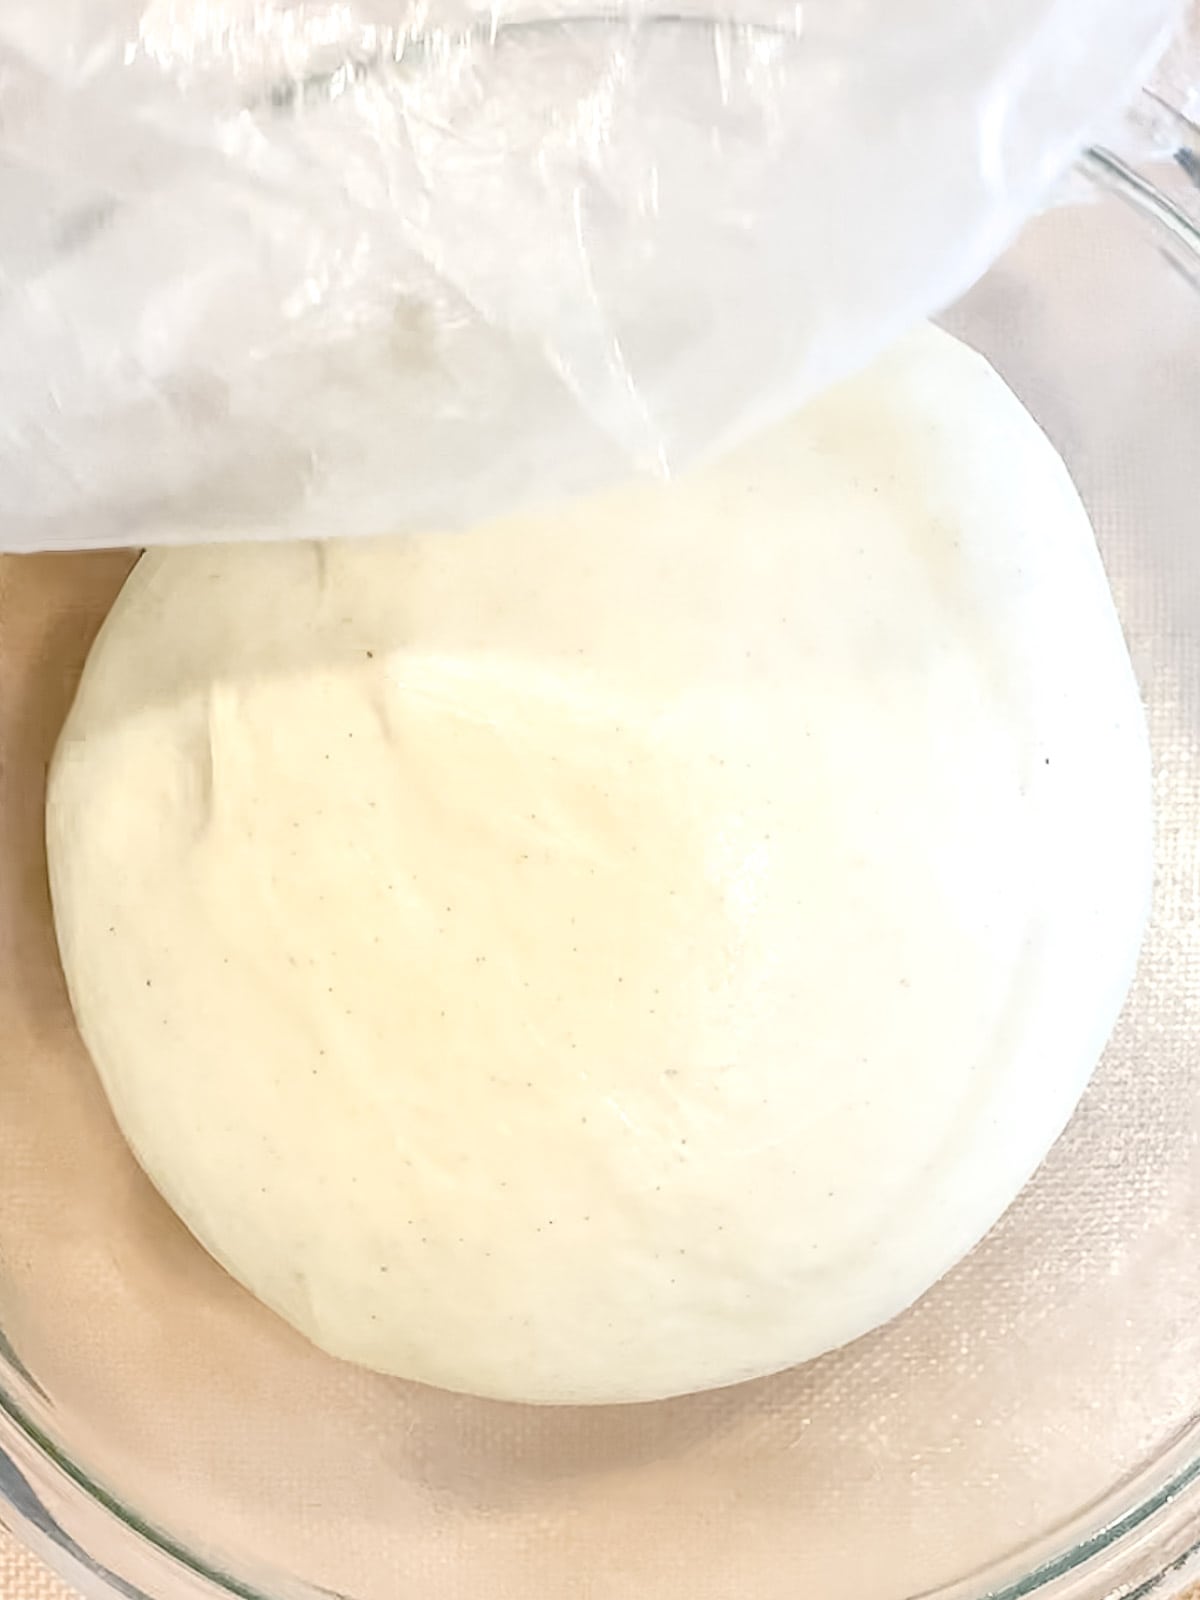 Ball of dough after rising for 45 minutes.